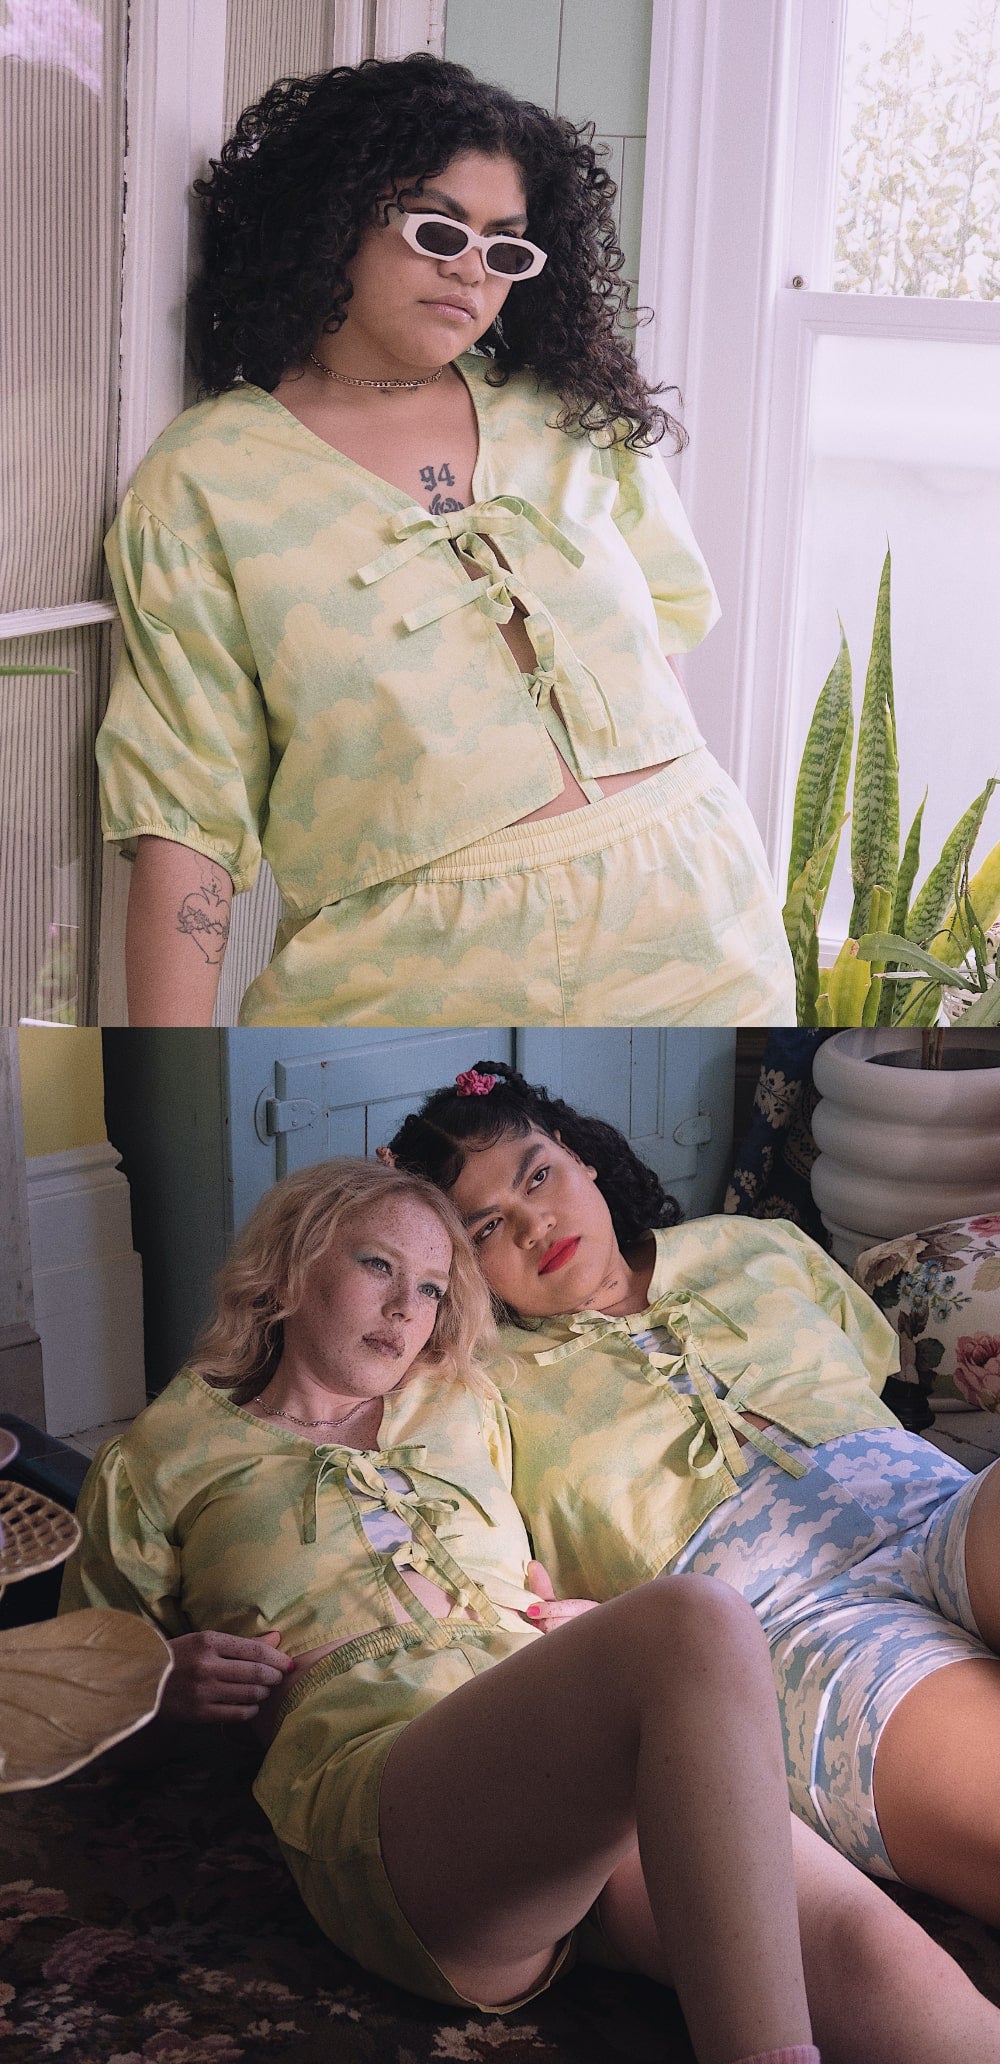 Lazy Oaf x Laura Callaghan: BTS Campaign